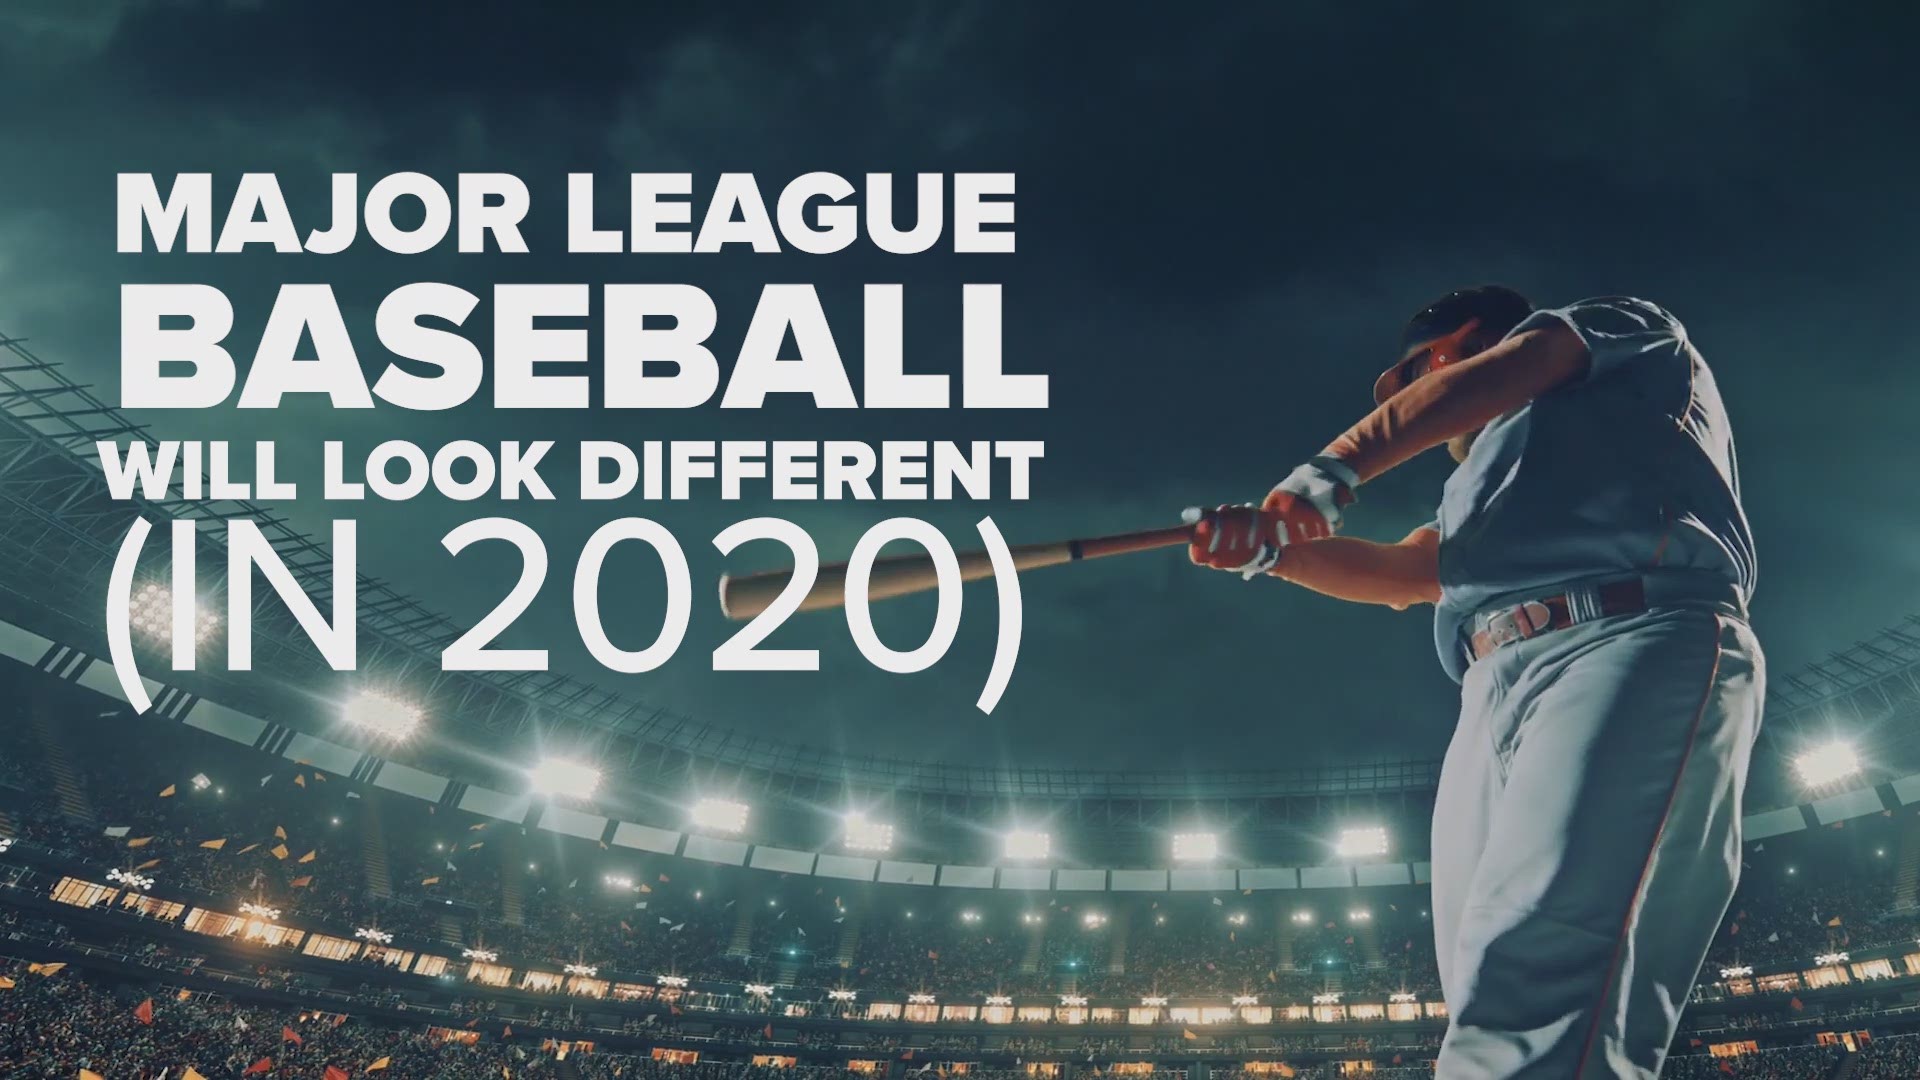 The pandemic has changed everything about everyday life, including baseball. The MLB is implementing these new rules for the 2020 baseball season.